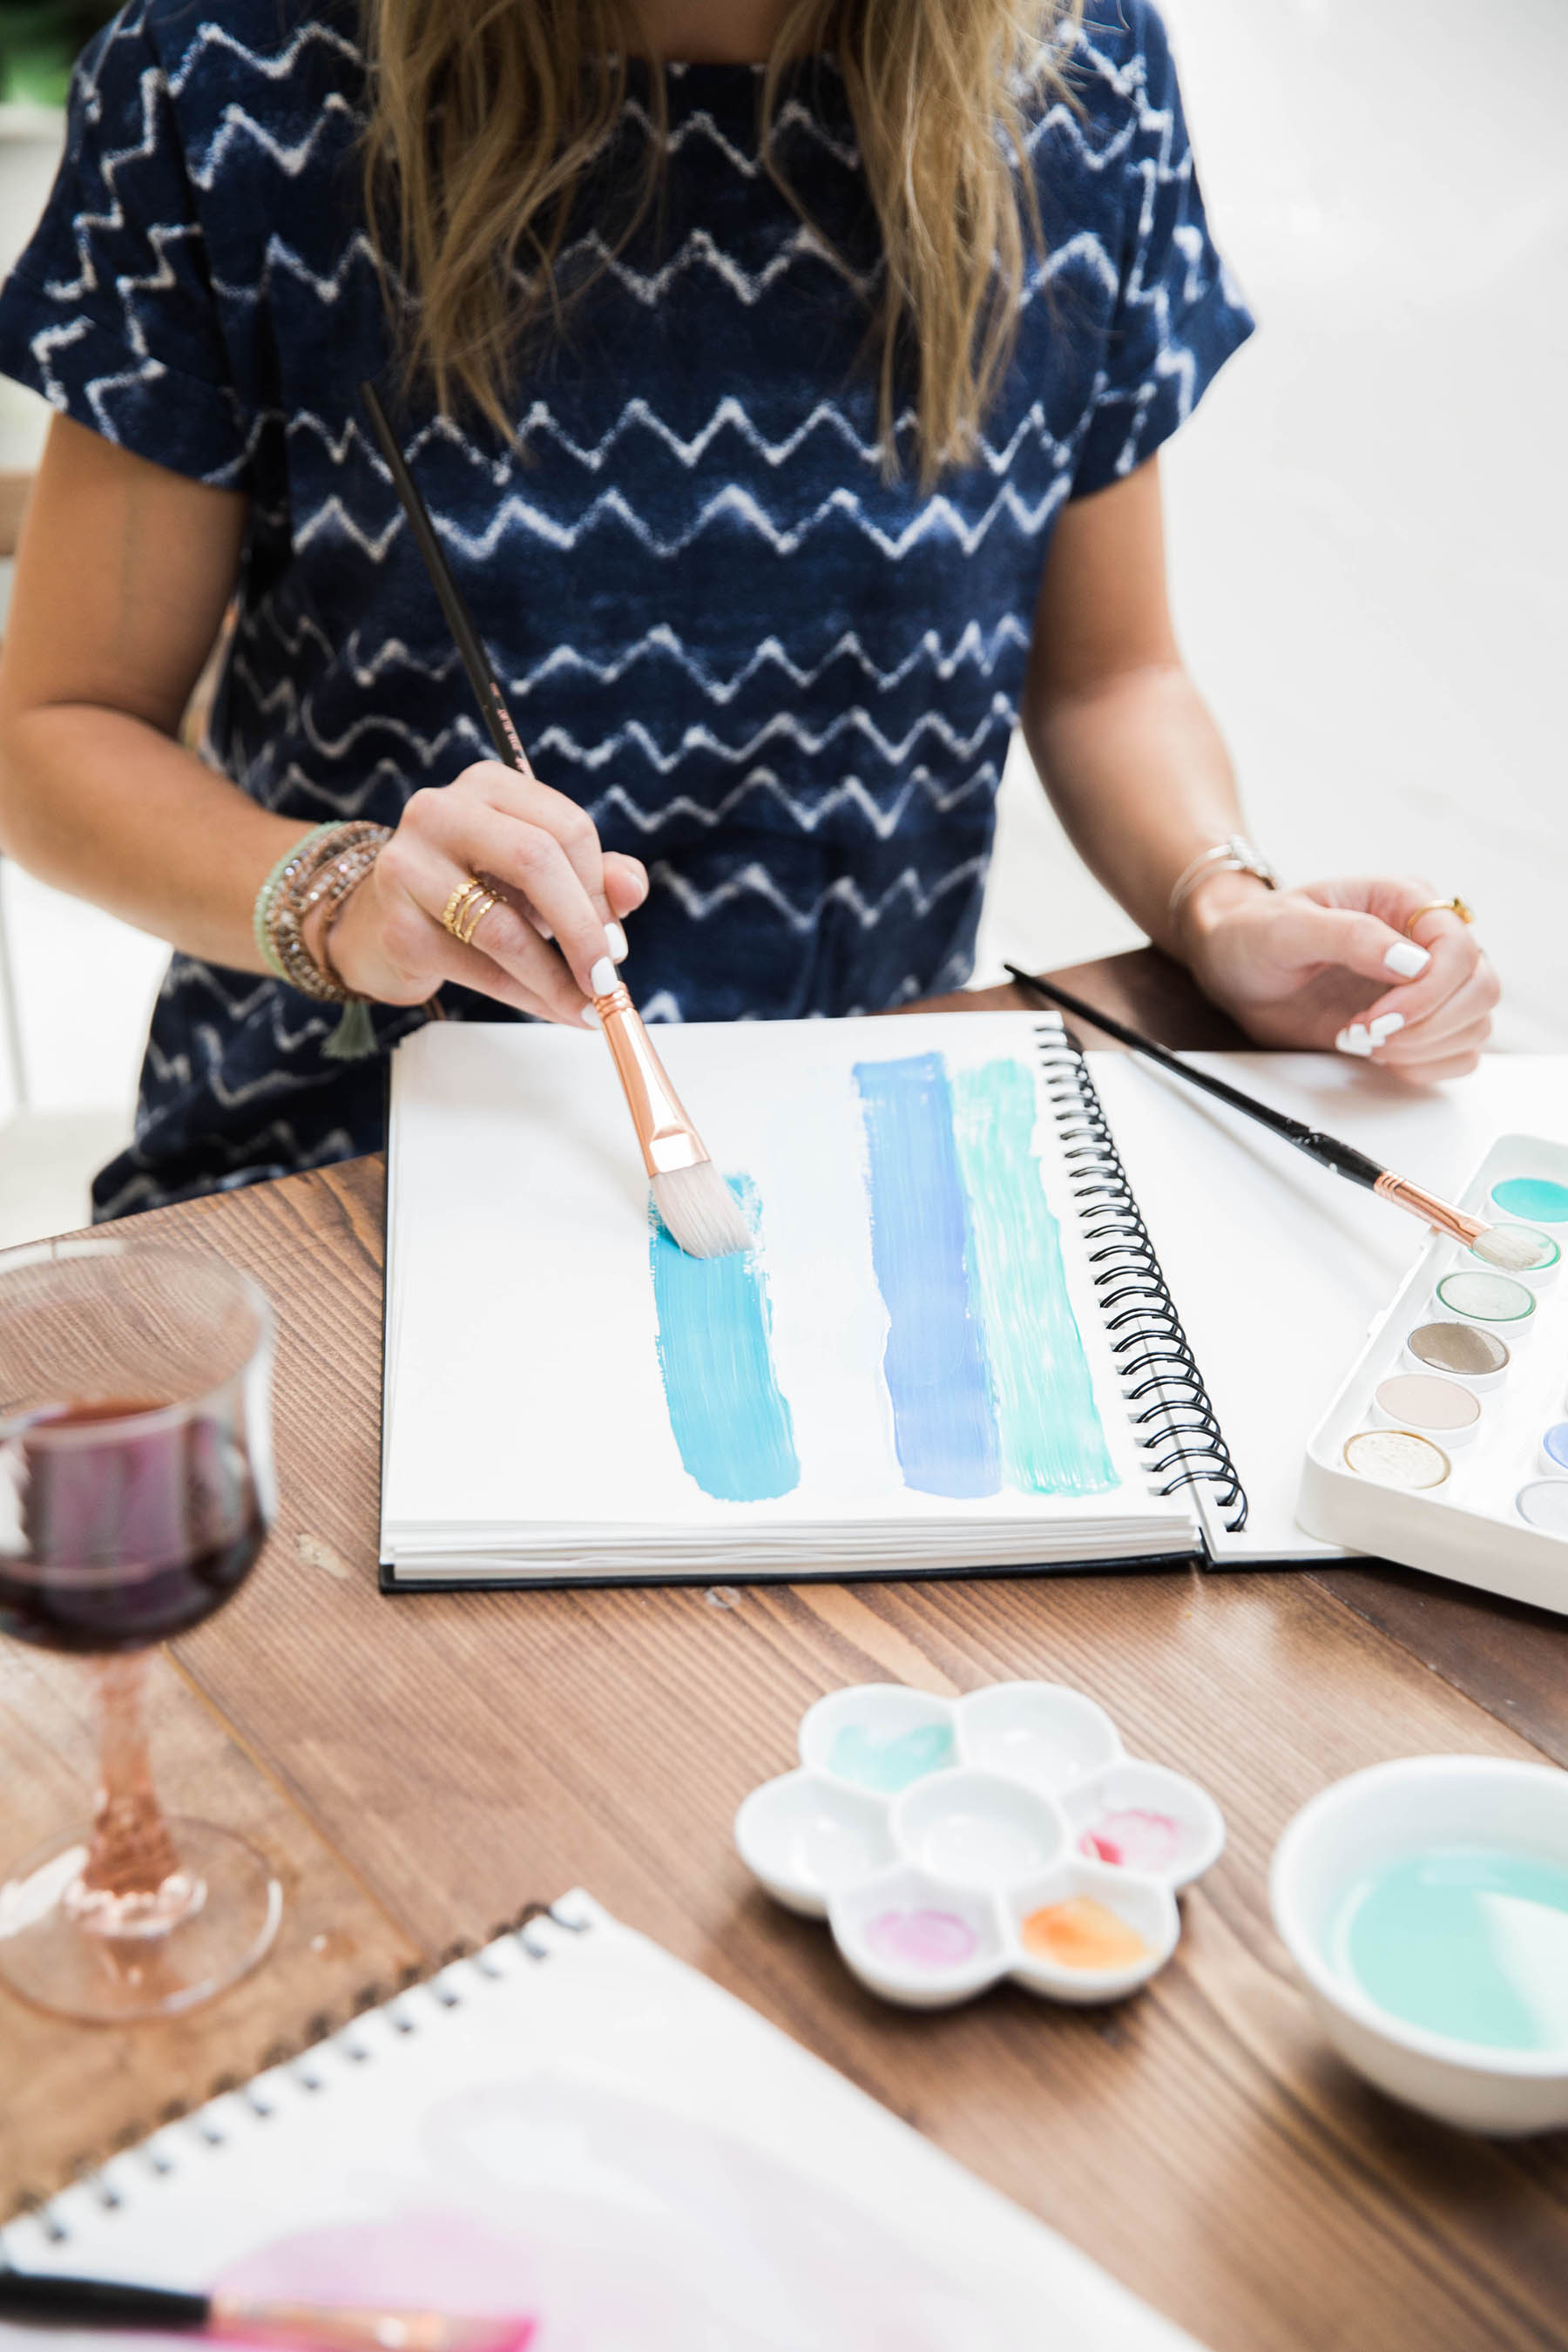 5 Ways to Get Inspired When You’re in a Creative Rut